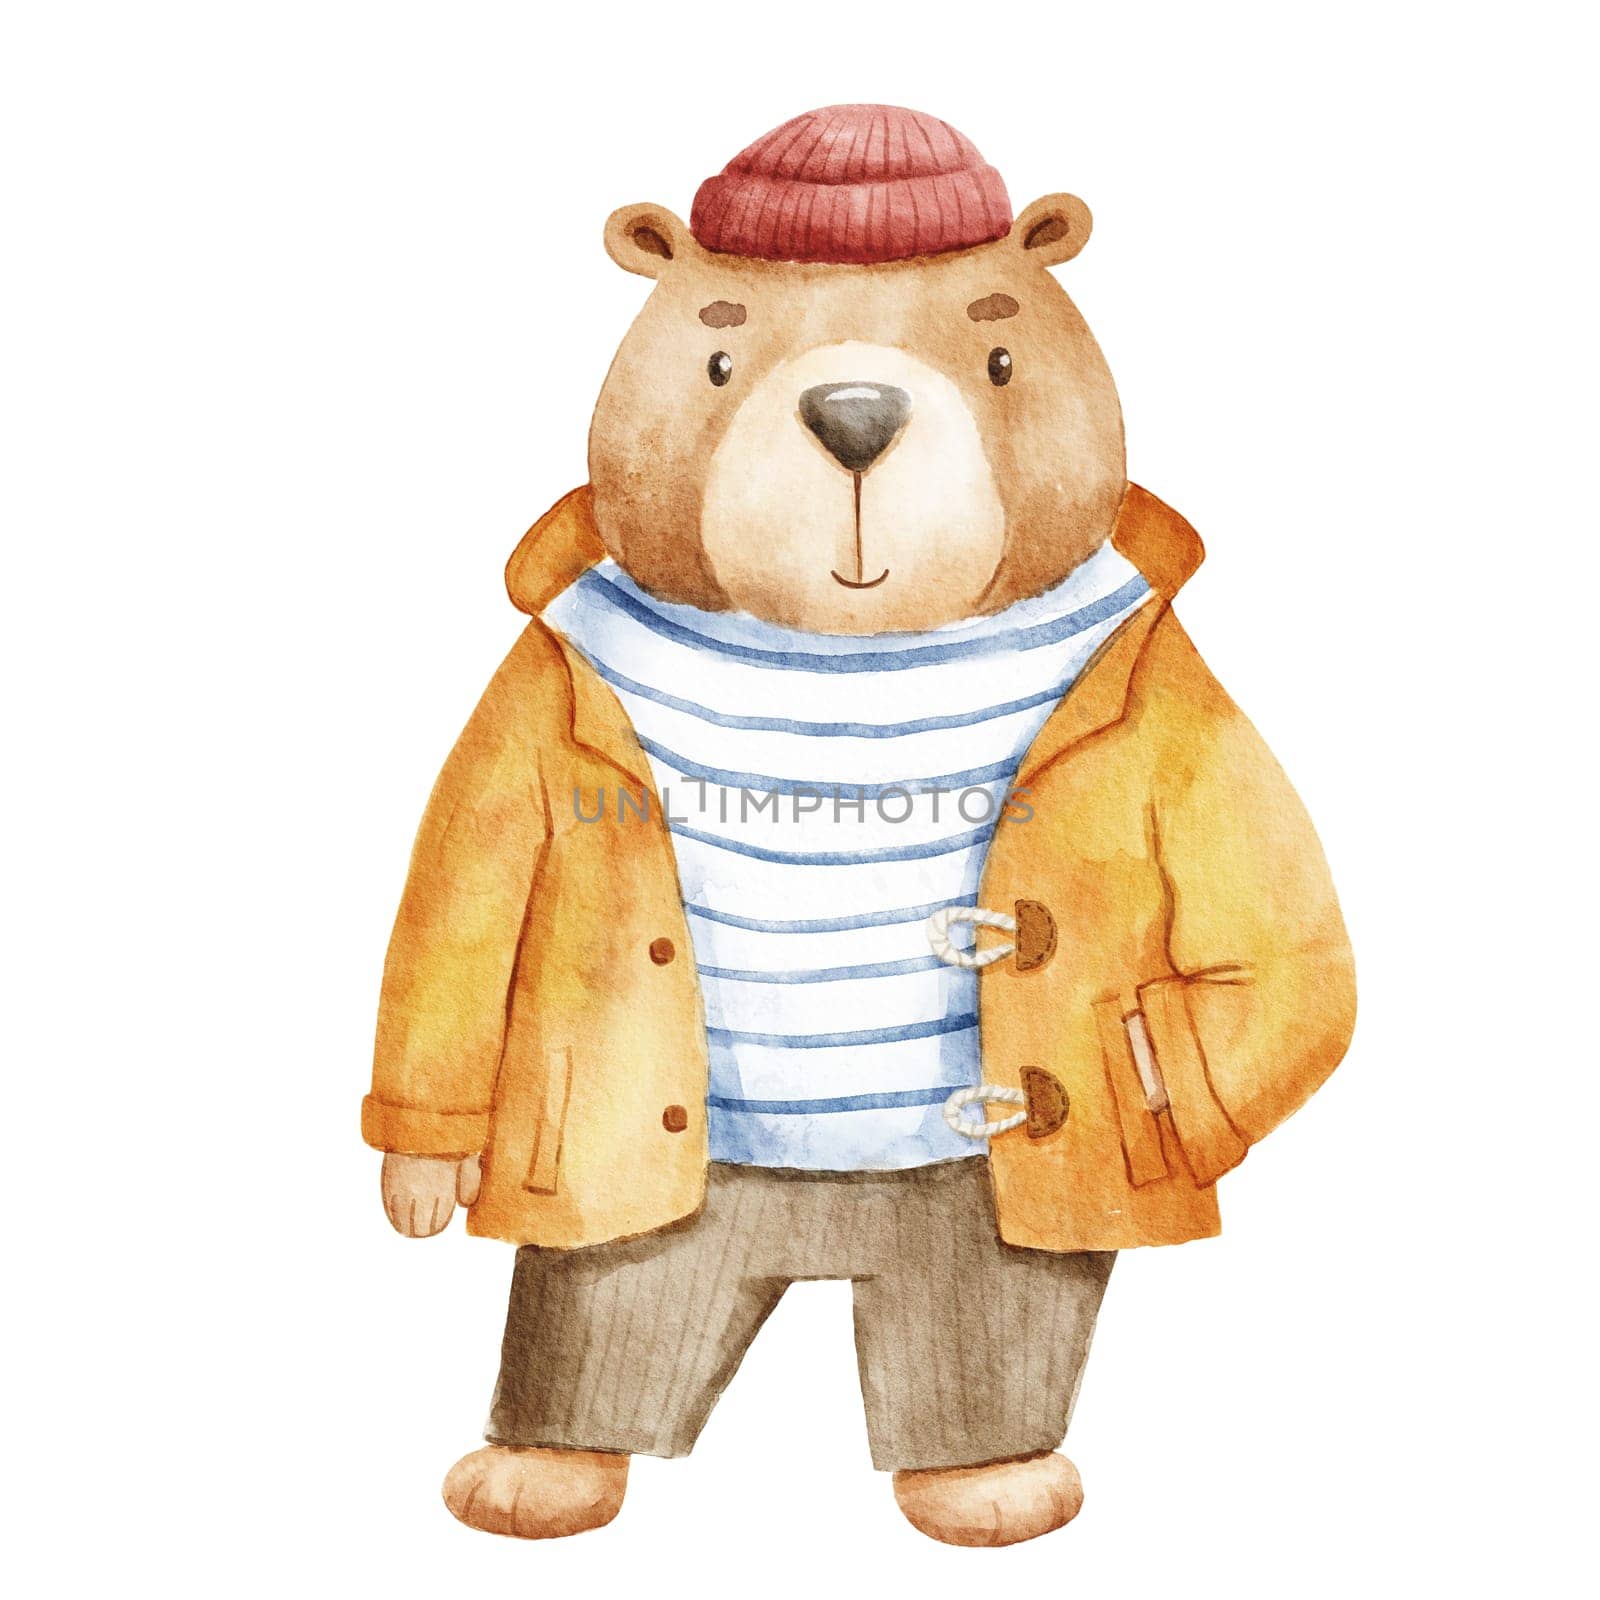 Cute sailor bear dressed in vest, hat and yellow fishing jacket. Funny watercolor illustration of child character isolated on white background